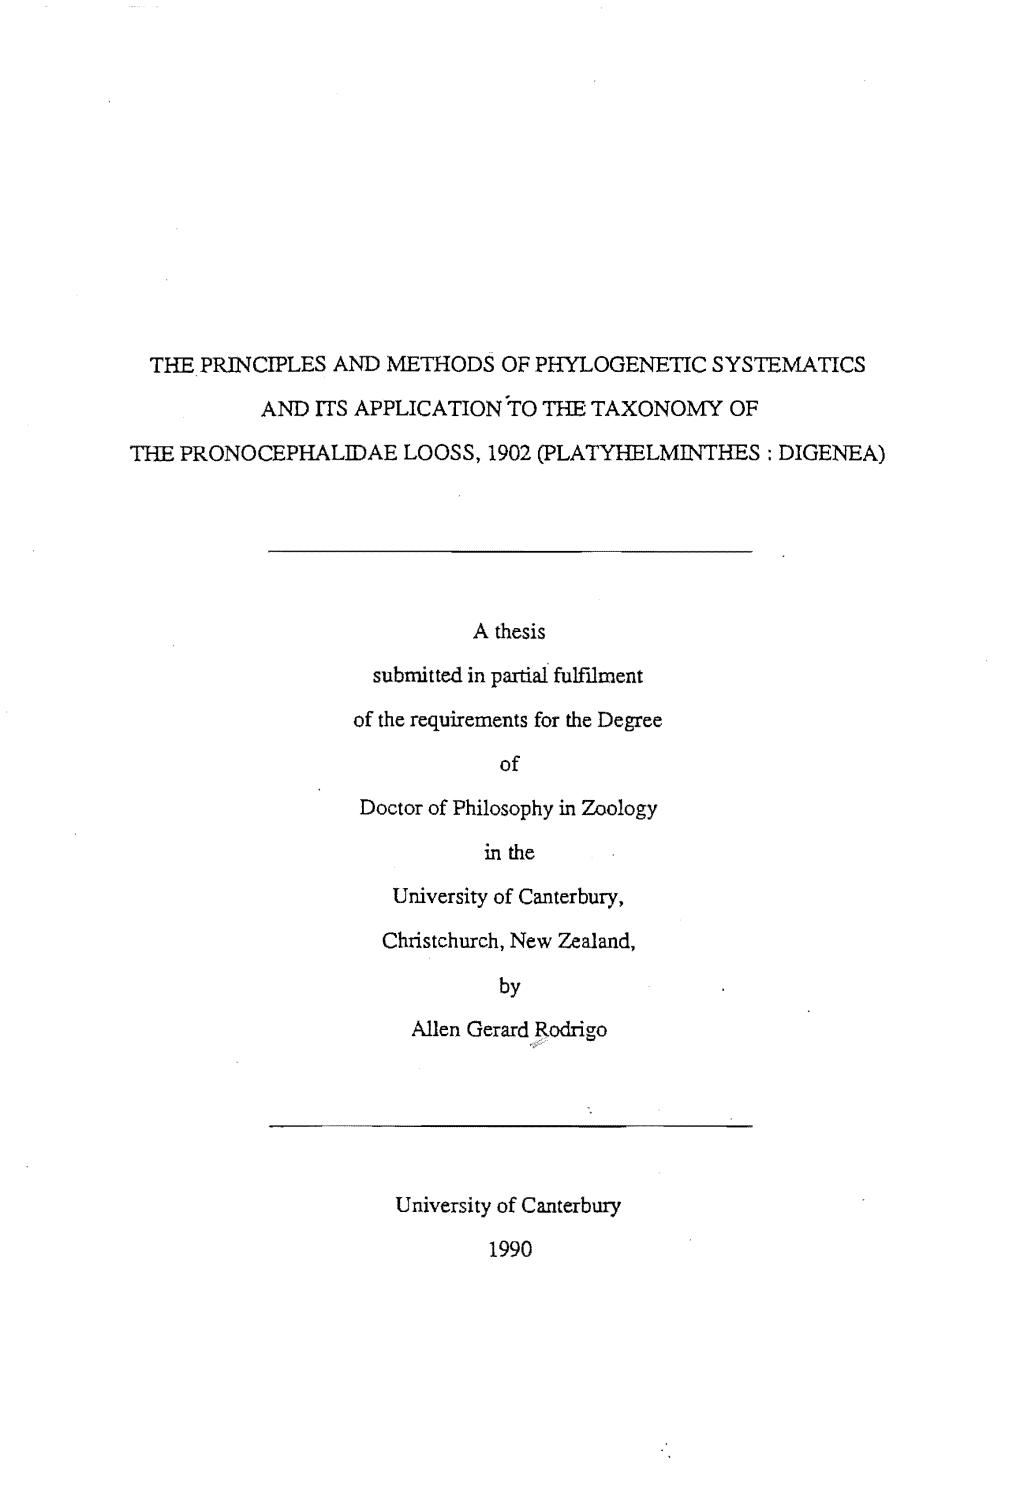 The Principles and Methods of Phylogenetic Systematics and Its